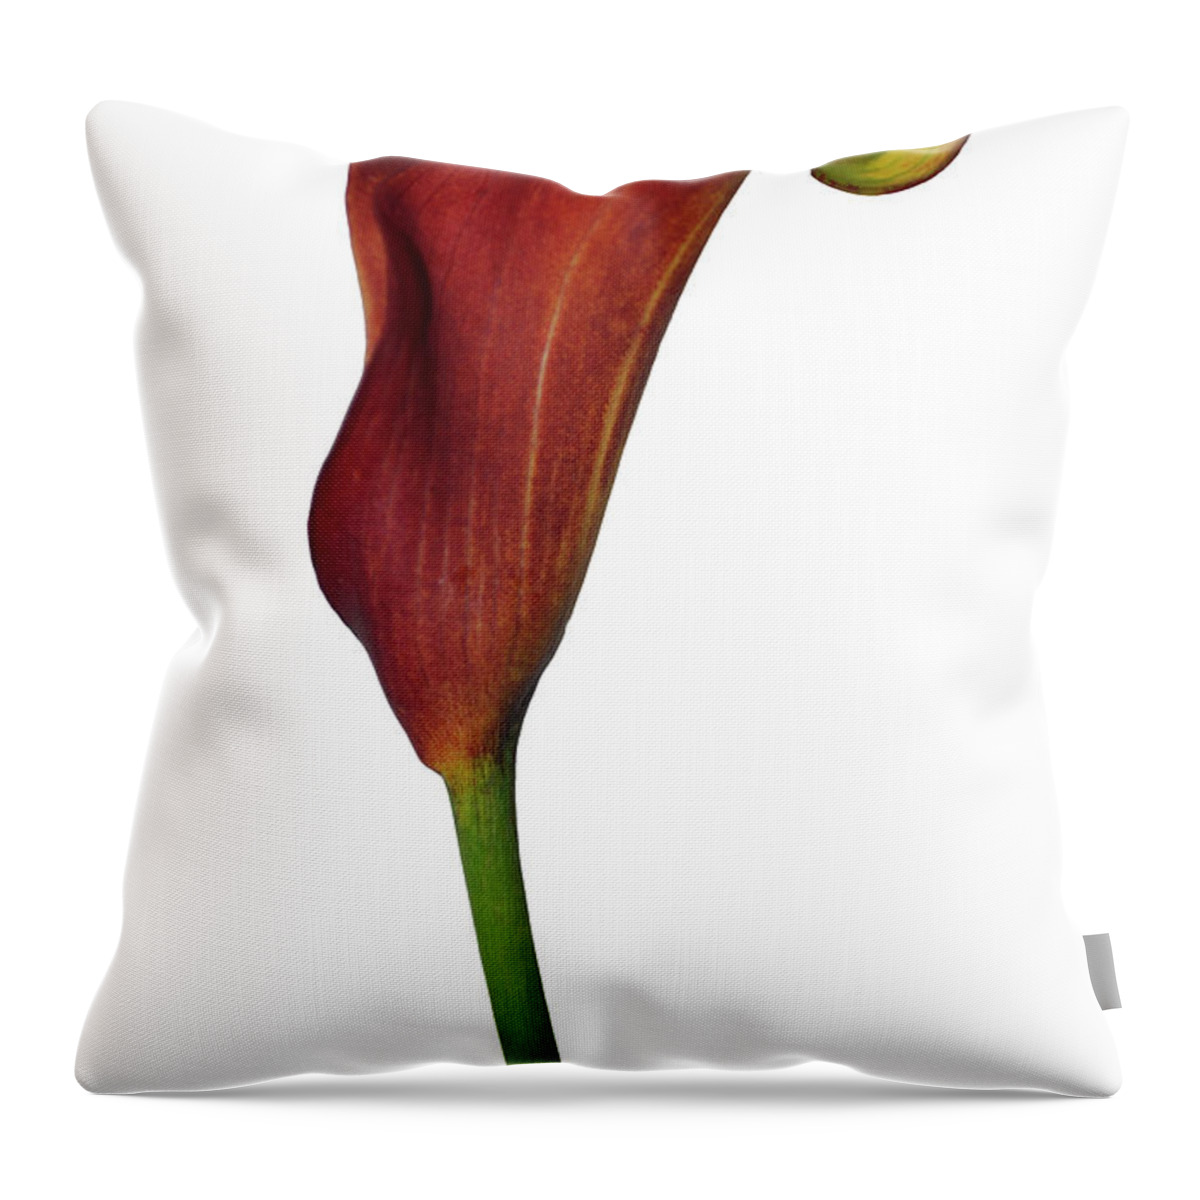 Rust Throw Pillow featuring the photograph Single Rust Calla Lily Stem by Heather Kirk